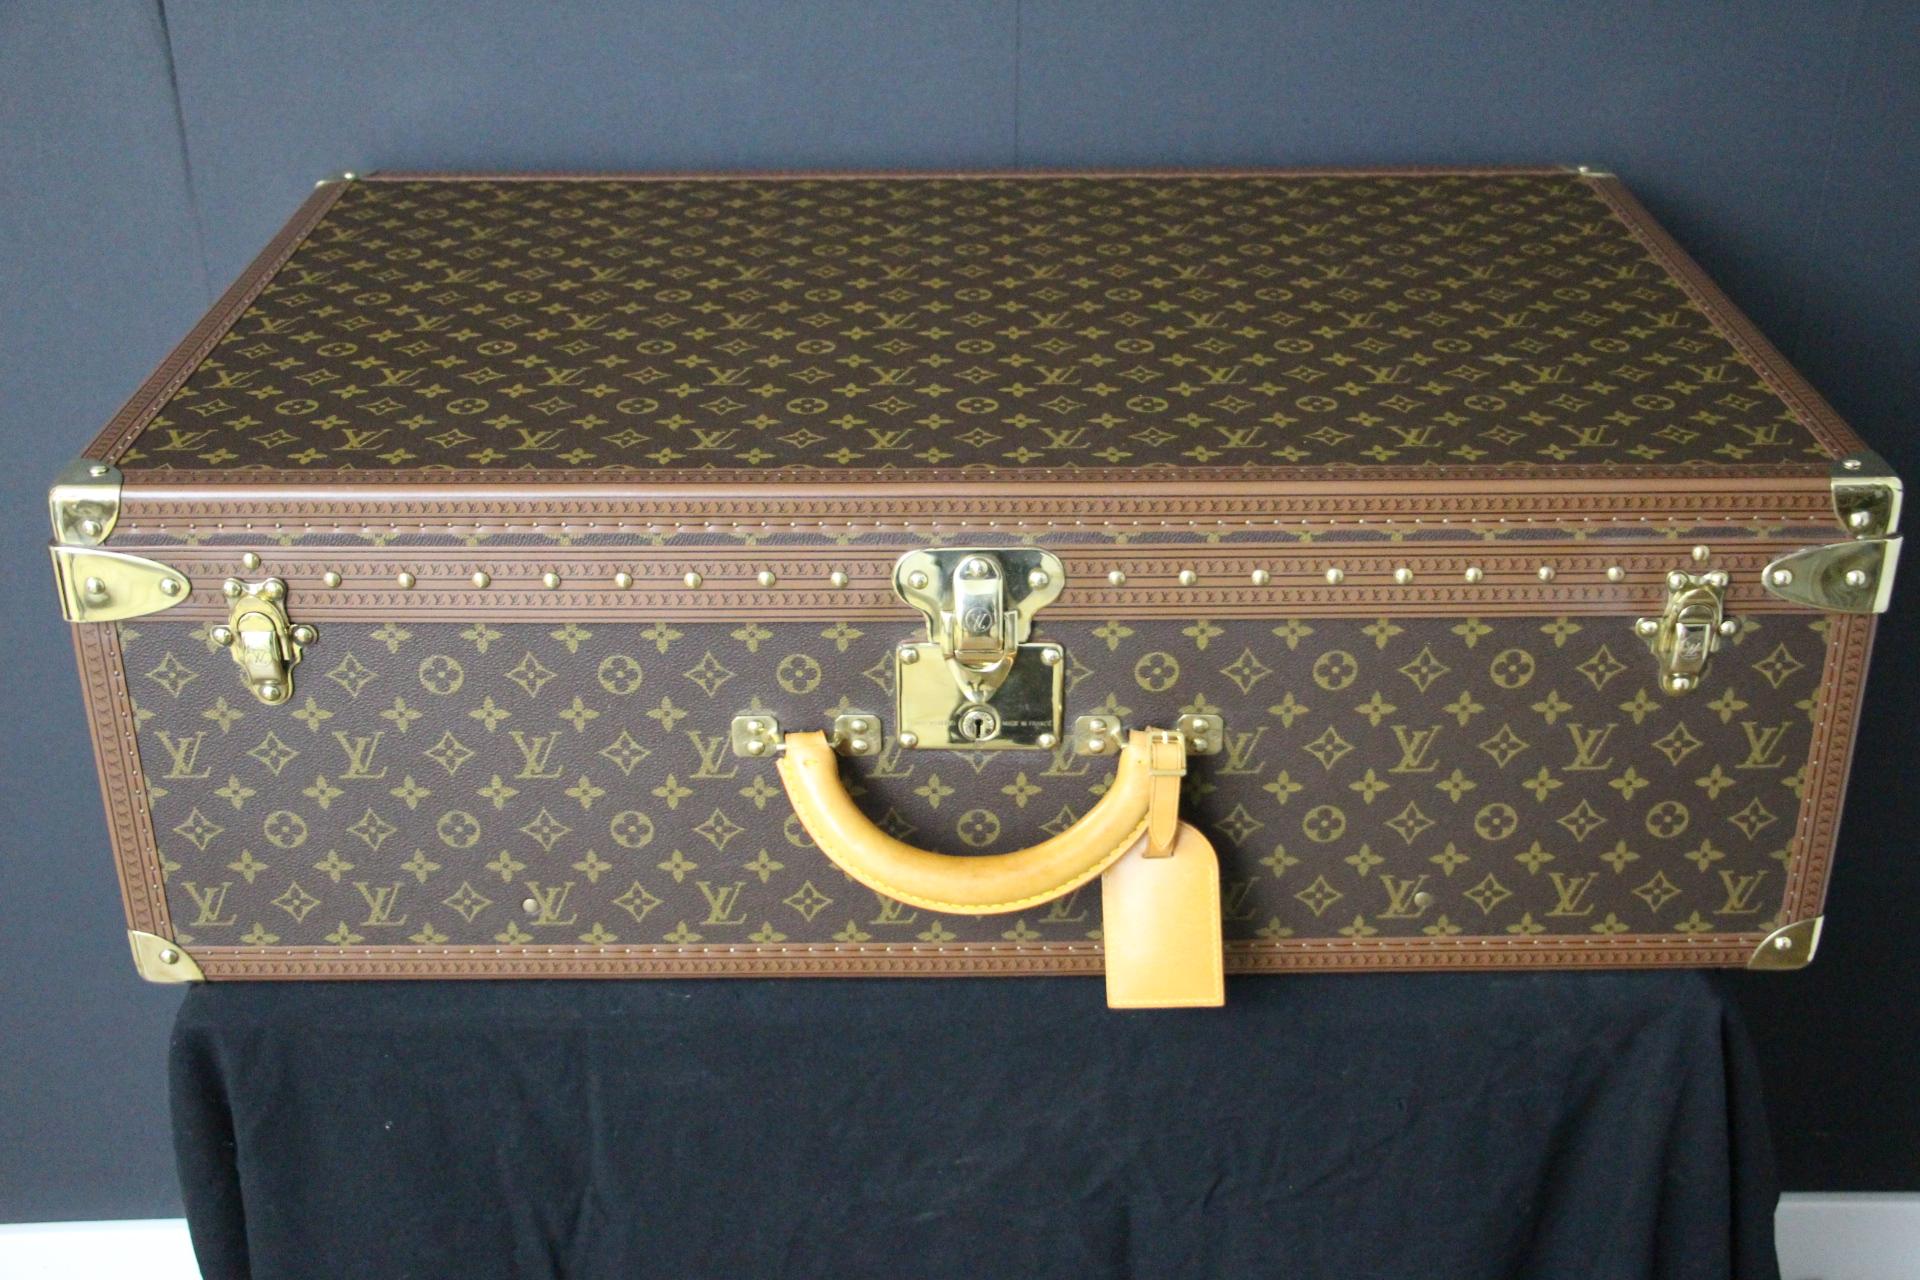 Magnificent Louis Vuitton Alzer monogramm suitcase. This 80 cm suitcase is the largest and the most luxury one made by Louis Vuitton. All Louis Vuitton stamped solid brass fittings: locks, clasps and studs. Very nice interior, fresh and clean, no